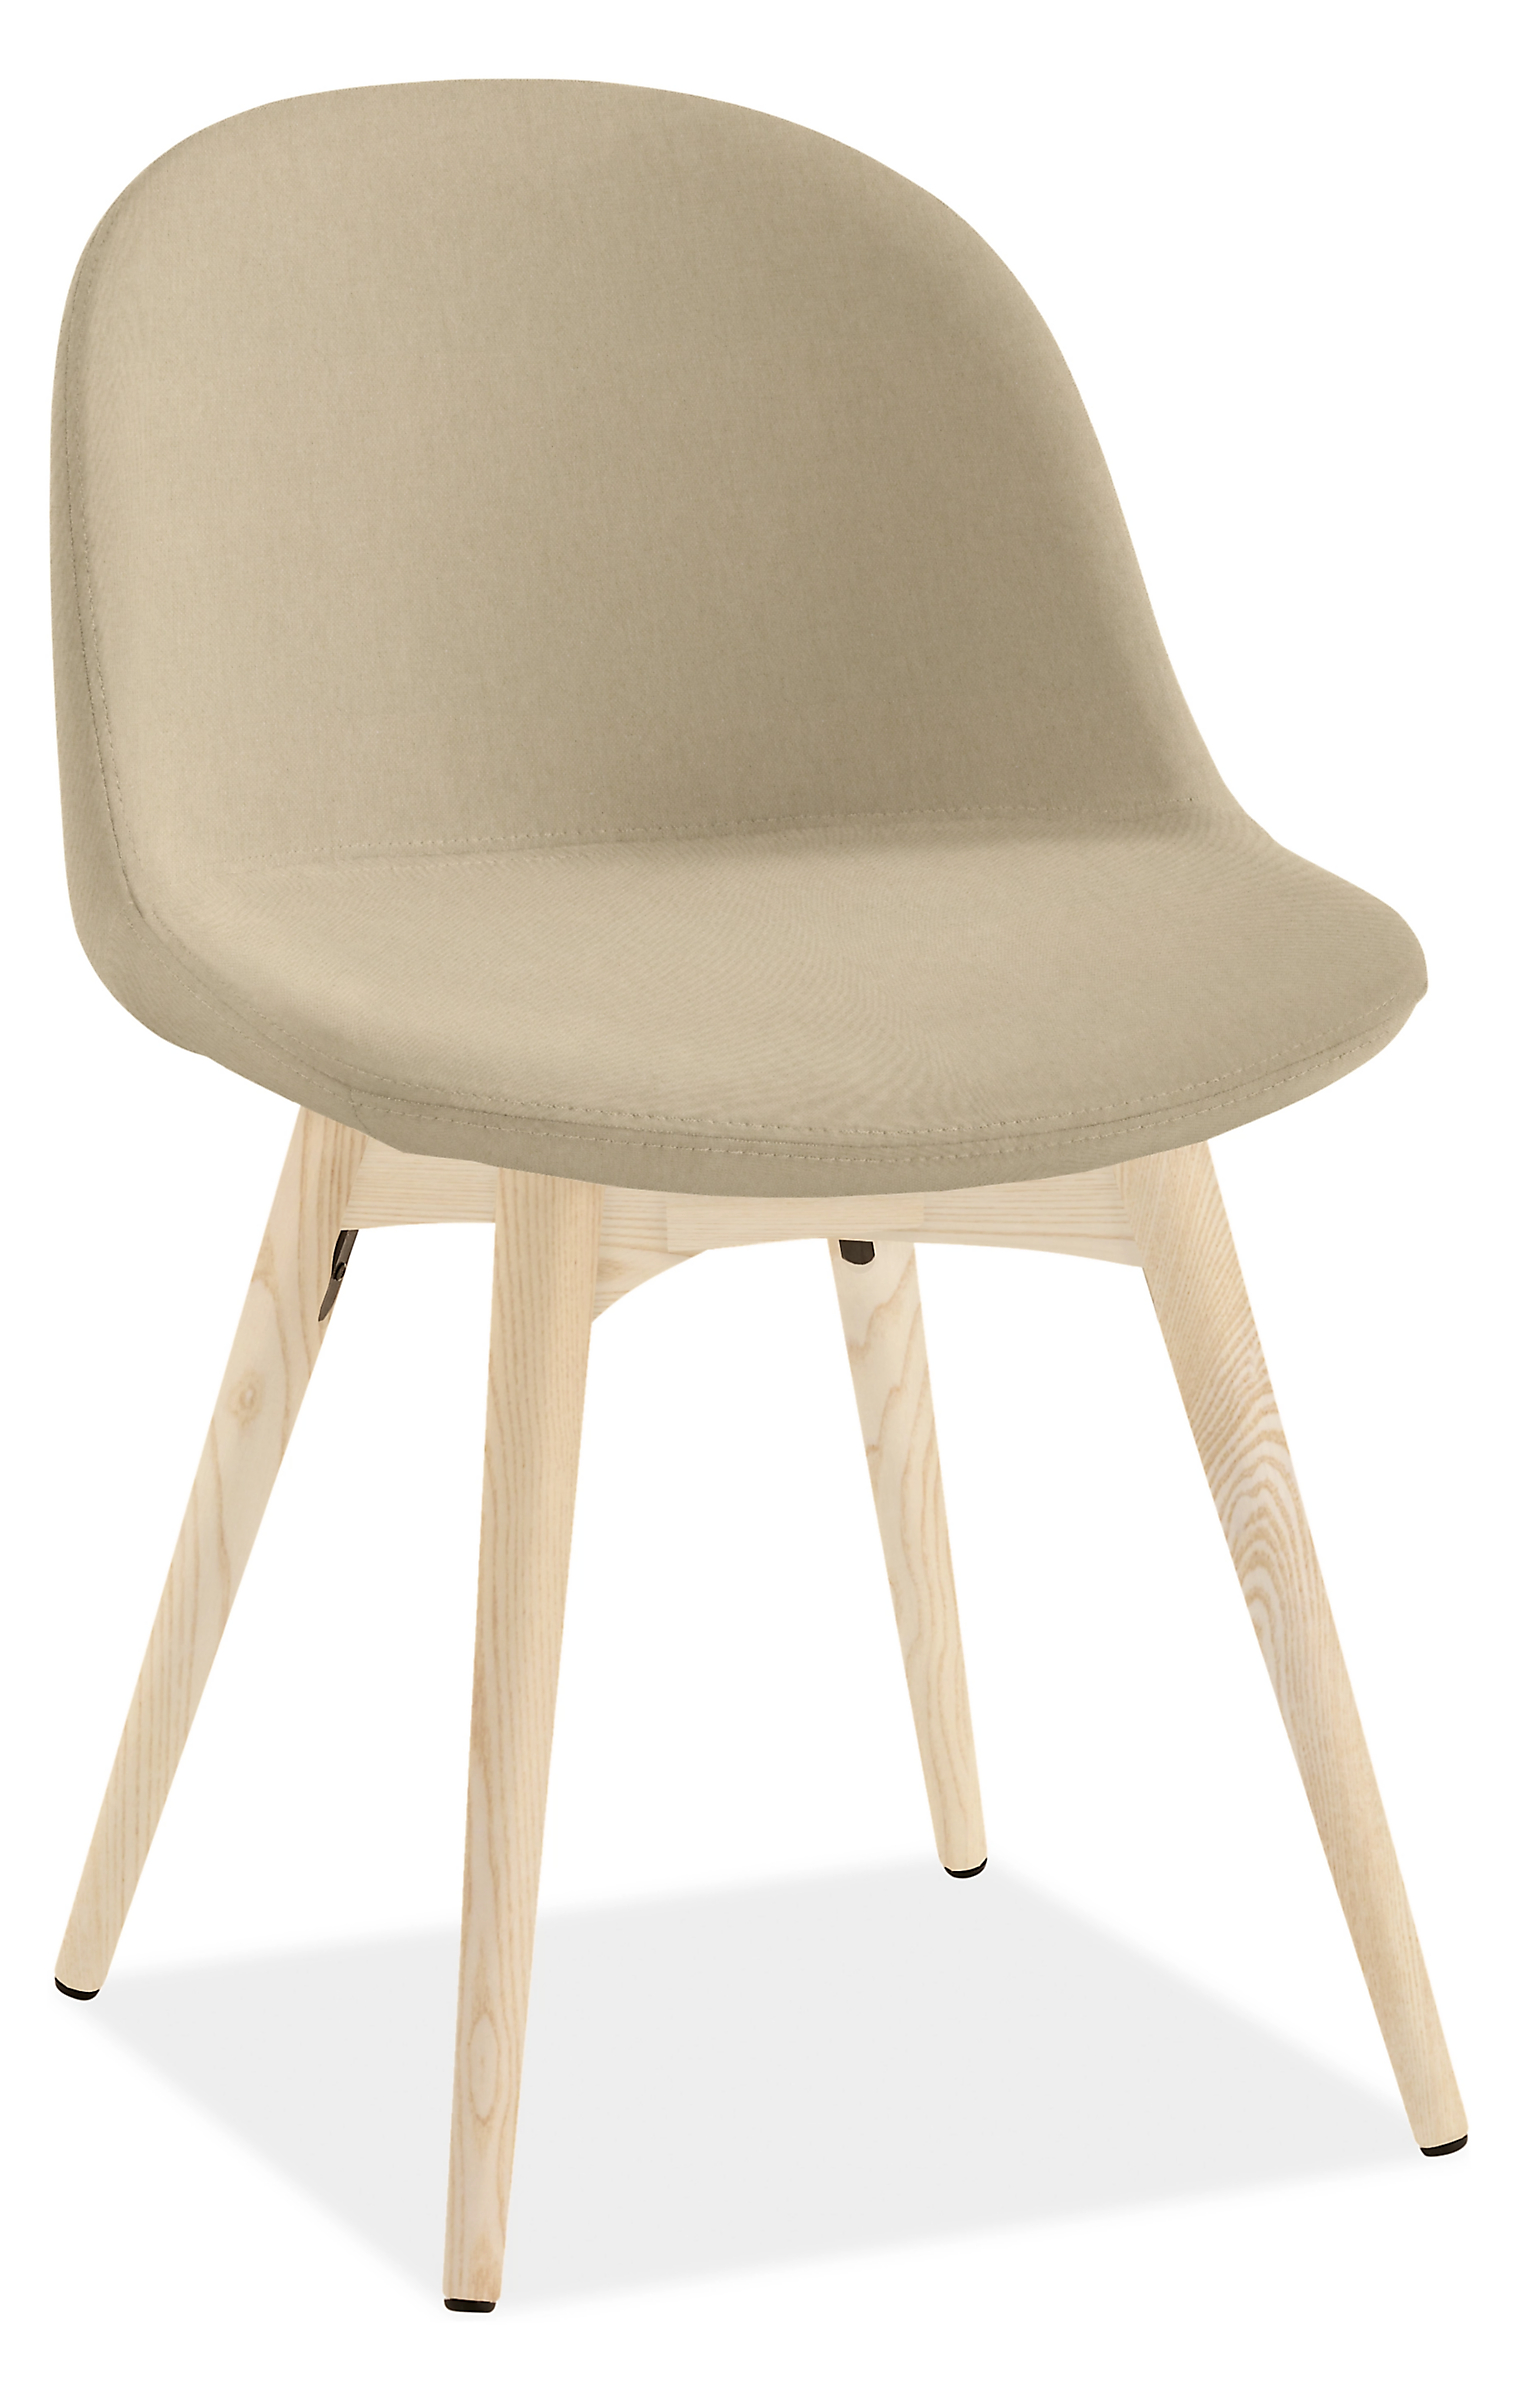 Bernard Dining Chair in Creel Natural Fabric with Ash Wood Legs